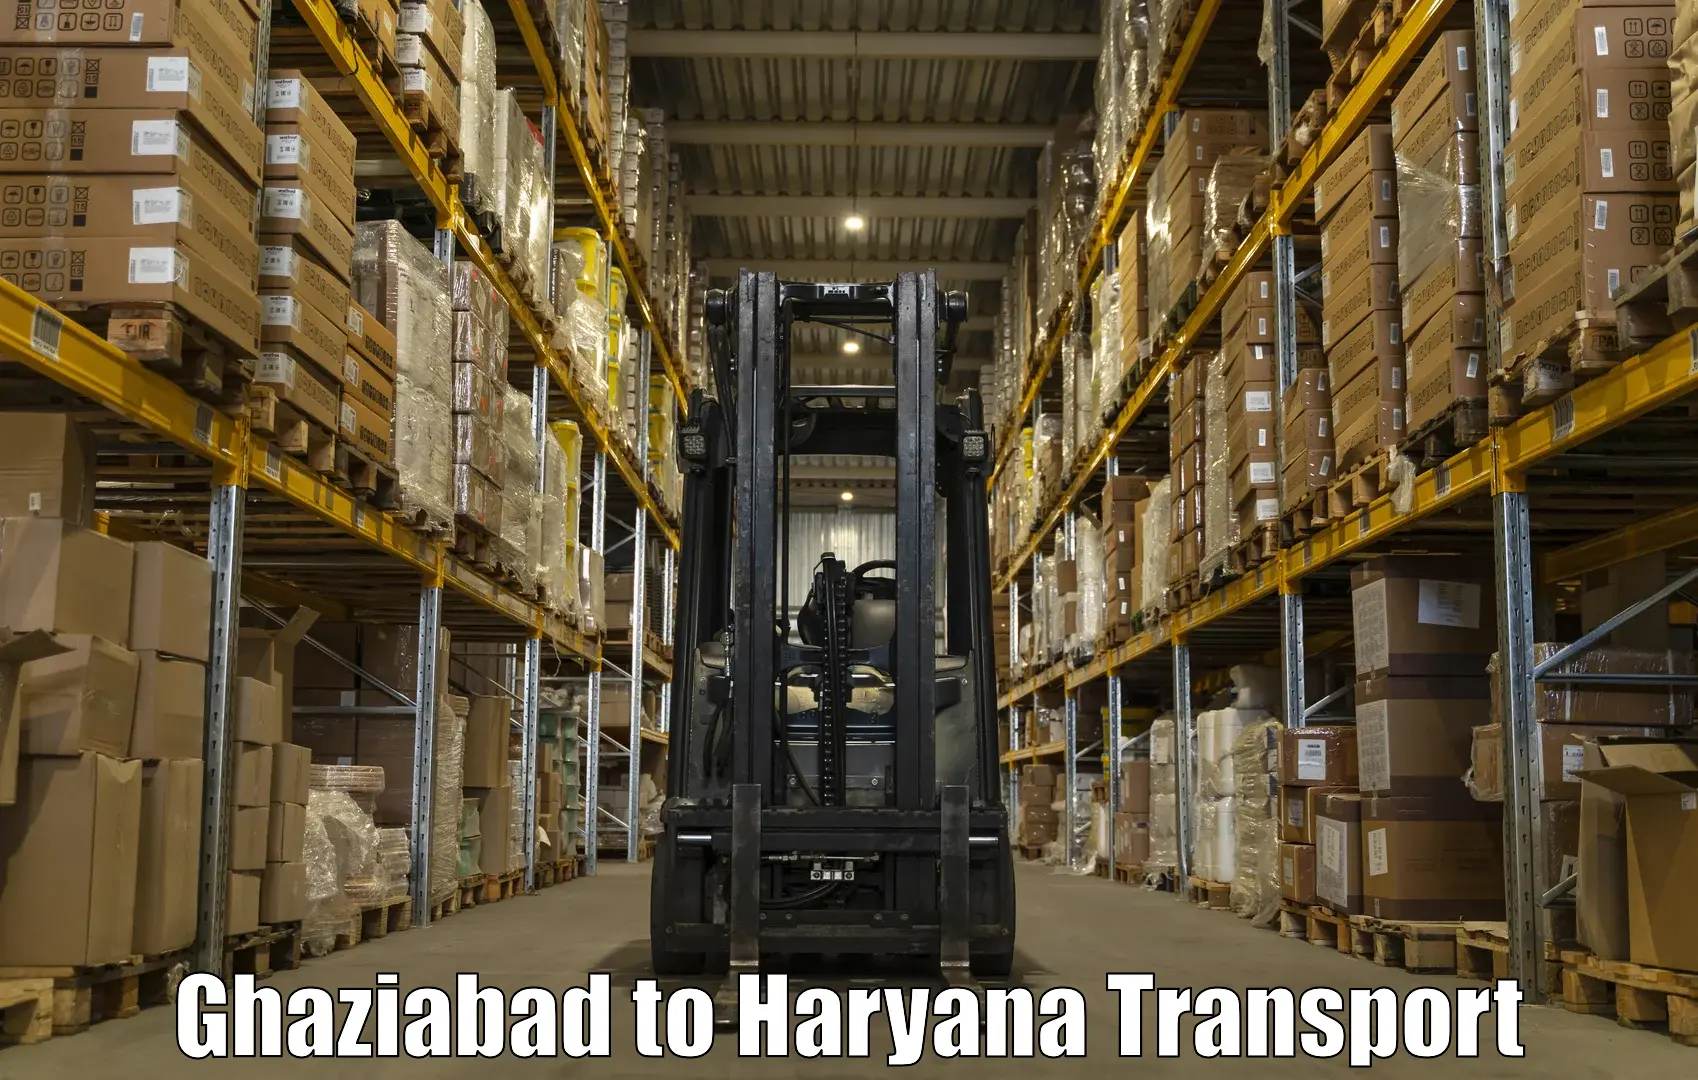 Pick up transport service Ghaziabad to Faridabad